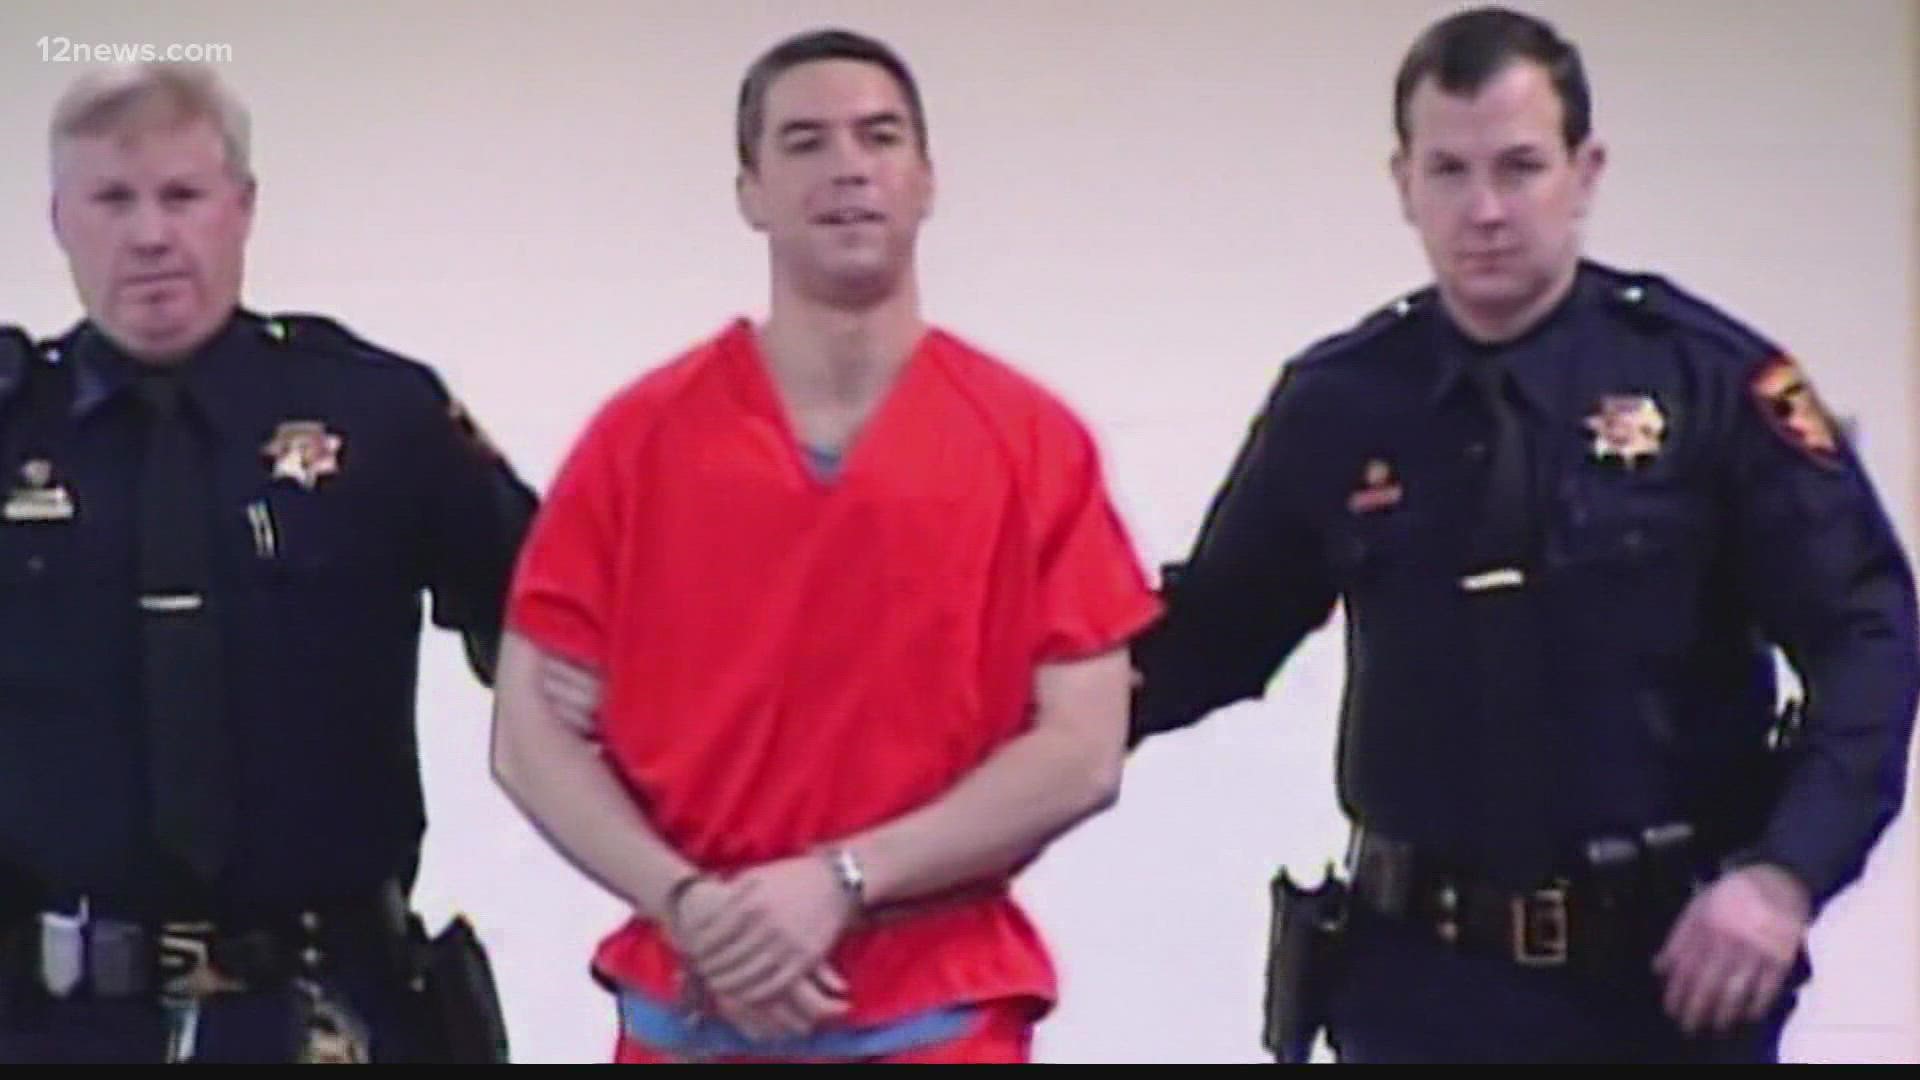 A California judge says she plans to re-sentence Scott Peterson to life in prison this fall in the 2002 murders of his wife and unborn son.